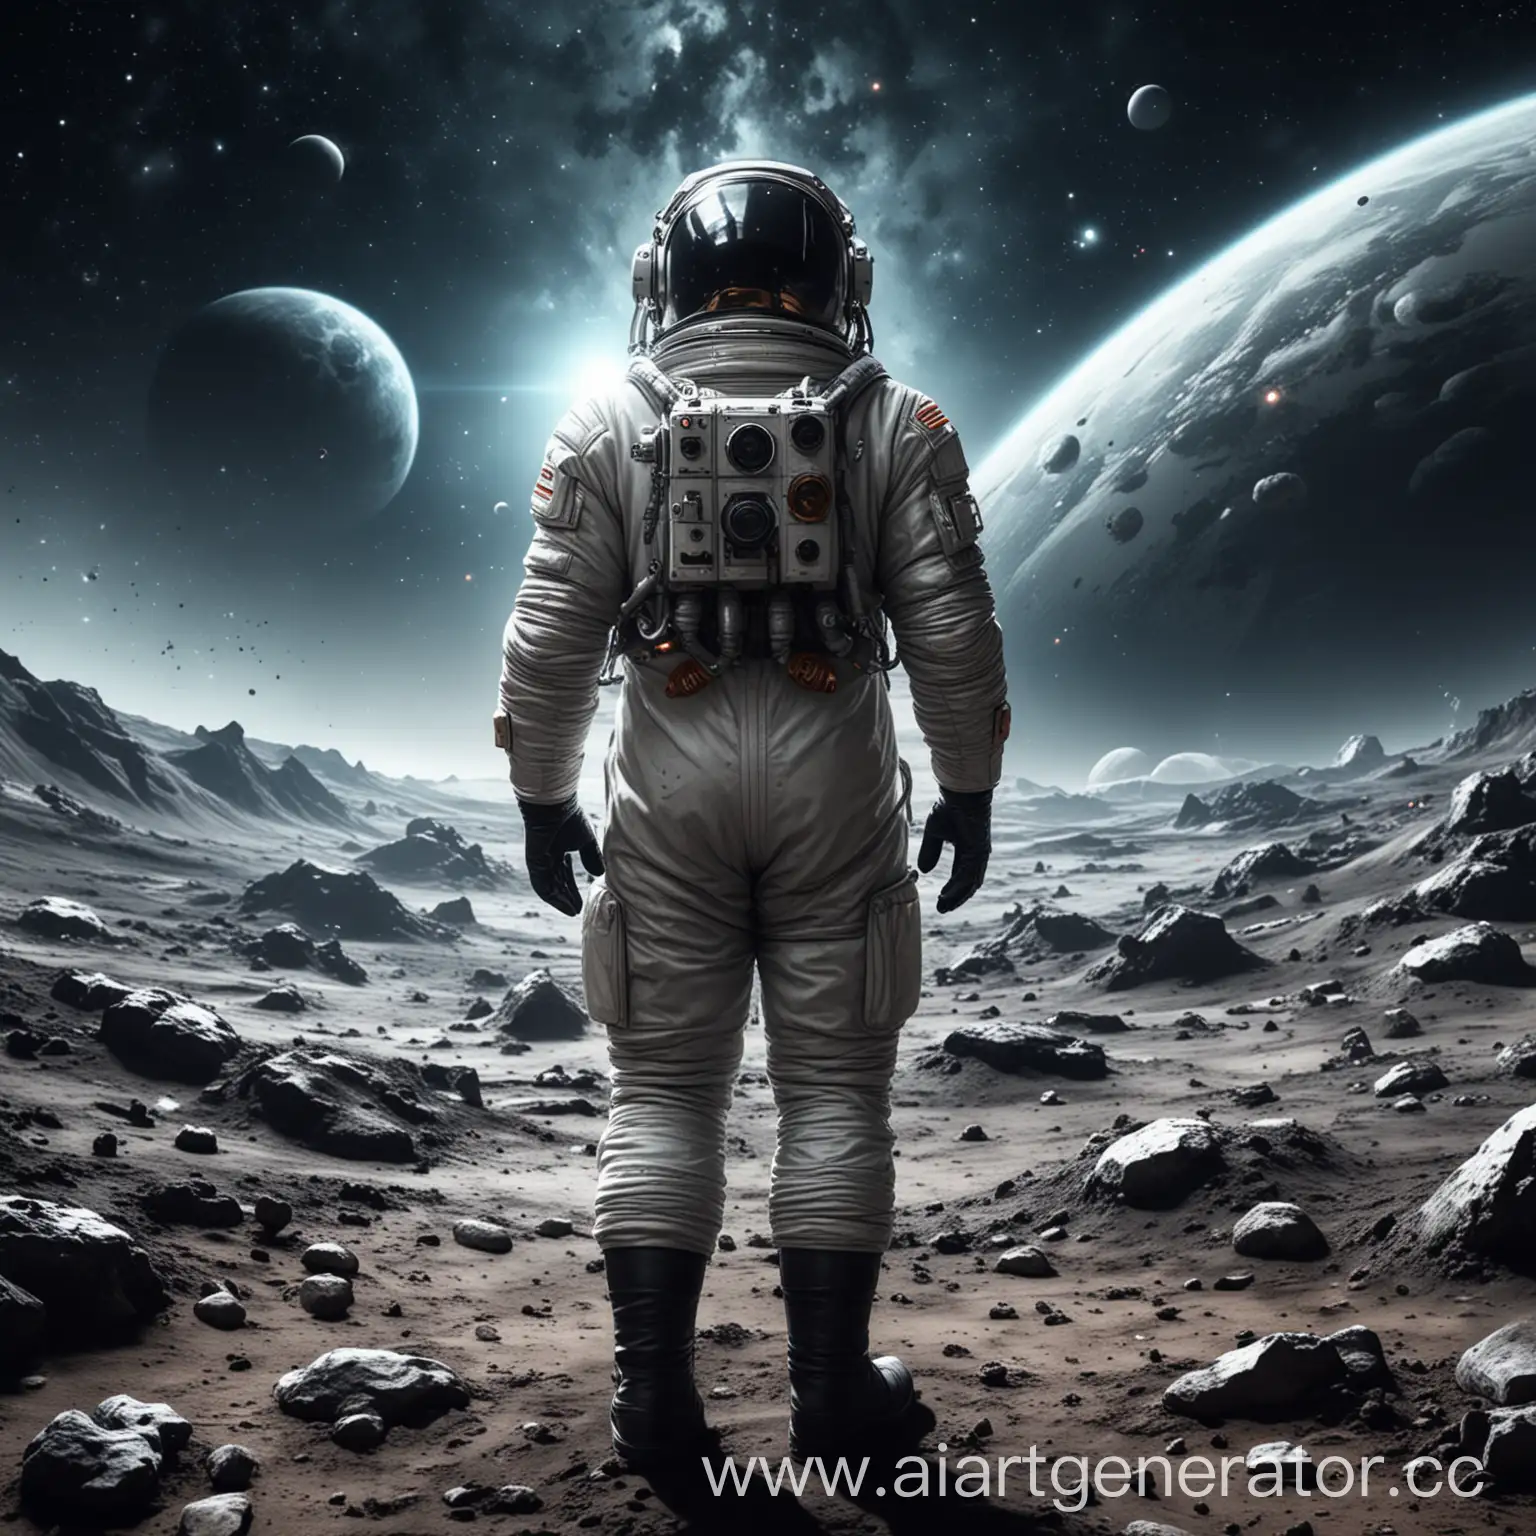 Cosmonaut-Stands-Before-Spaceship-Colony-in-Galactic-Exploration-Scene